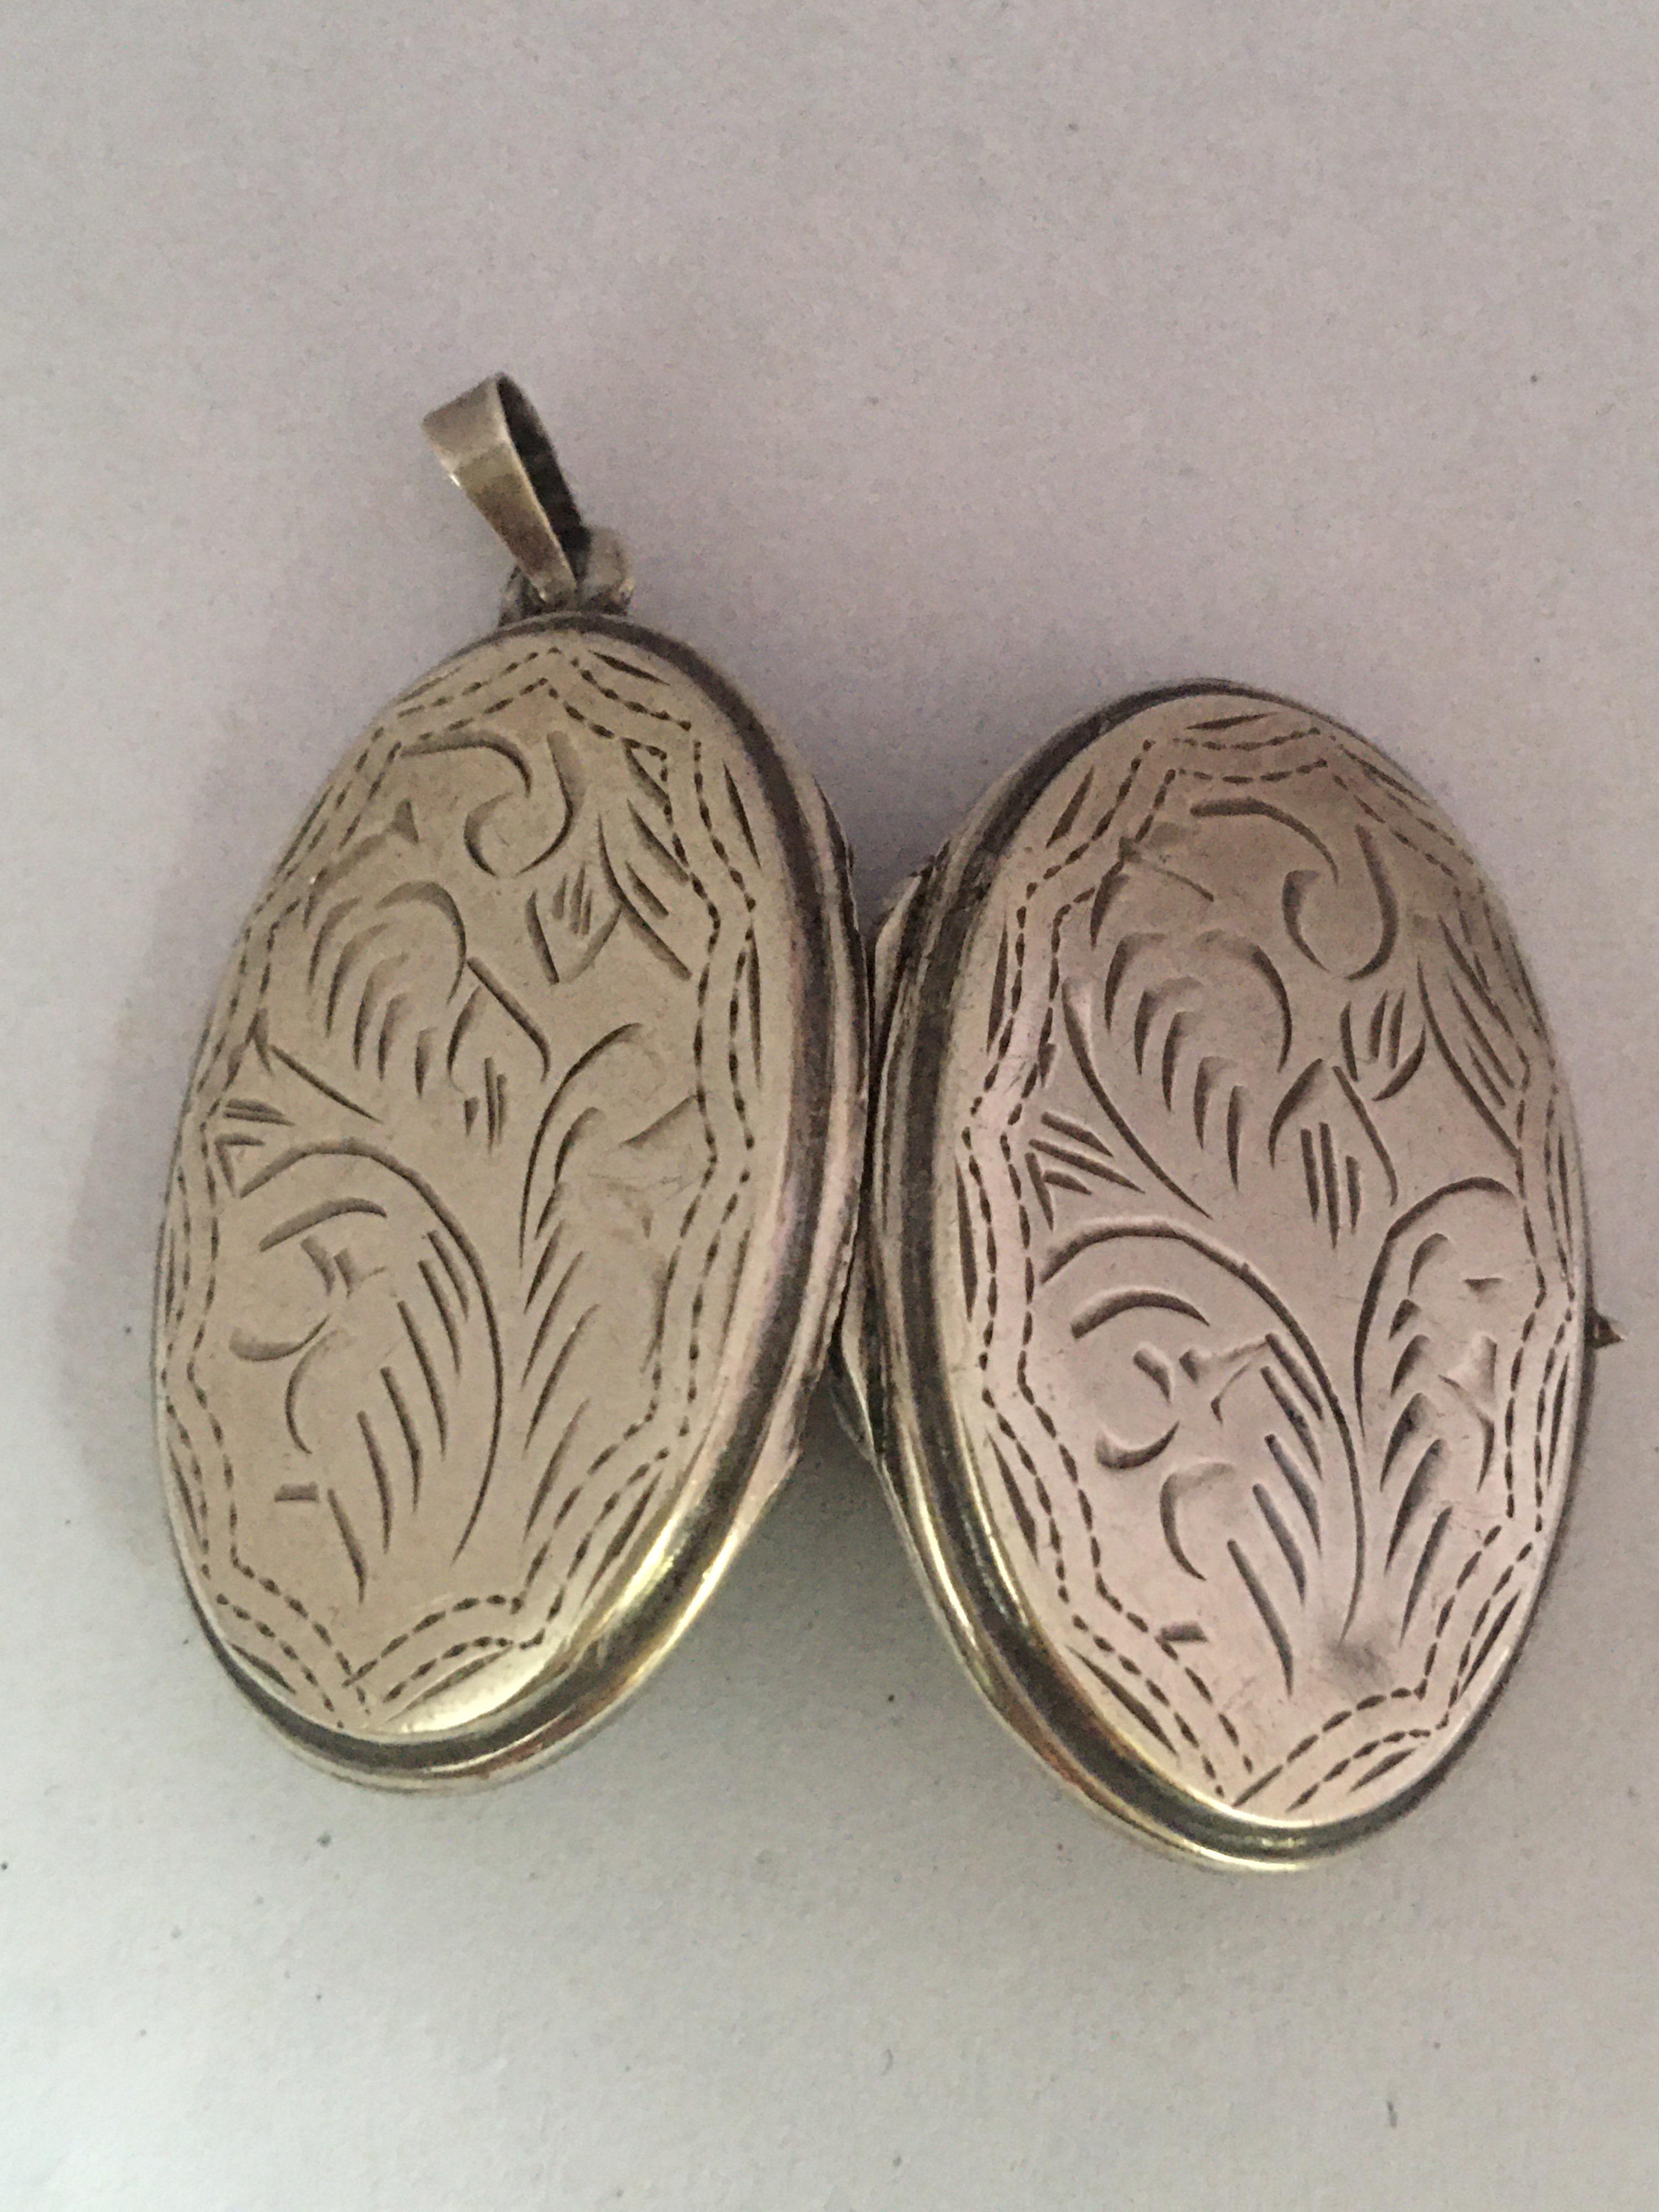 This beautiful antique silver oval locket pendant is in good condition. Visible signs of ageing and wear with small light marks as shown.